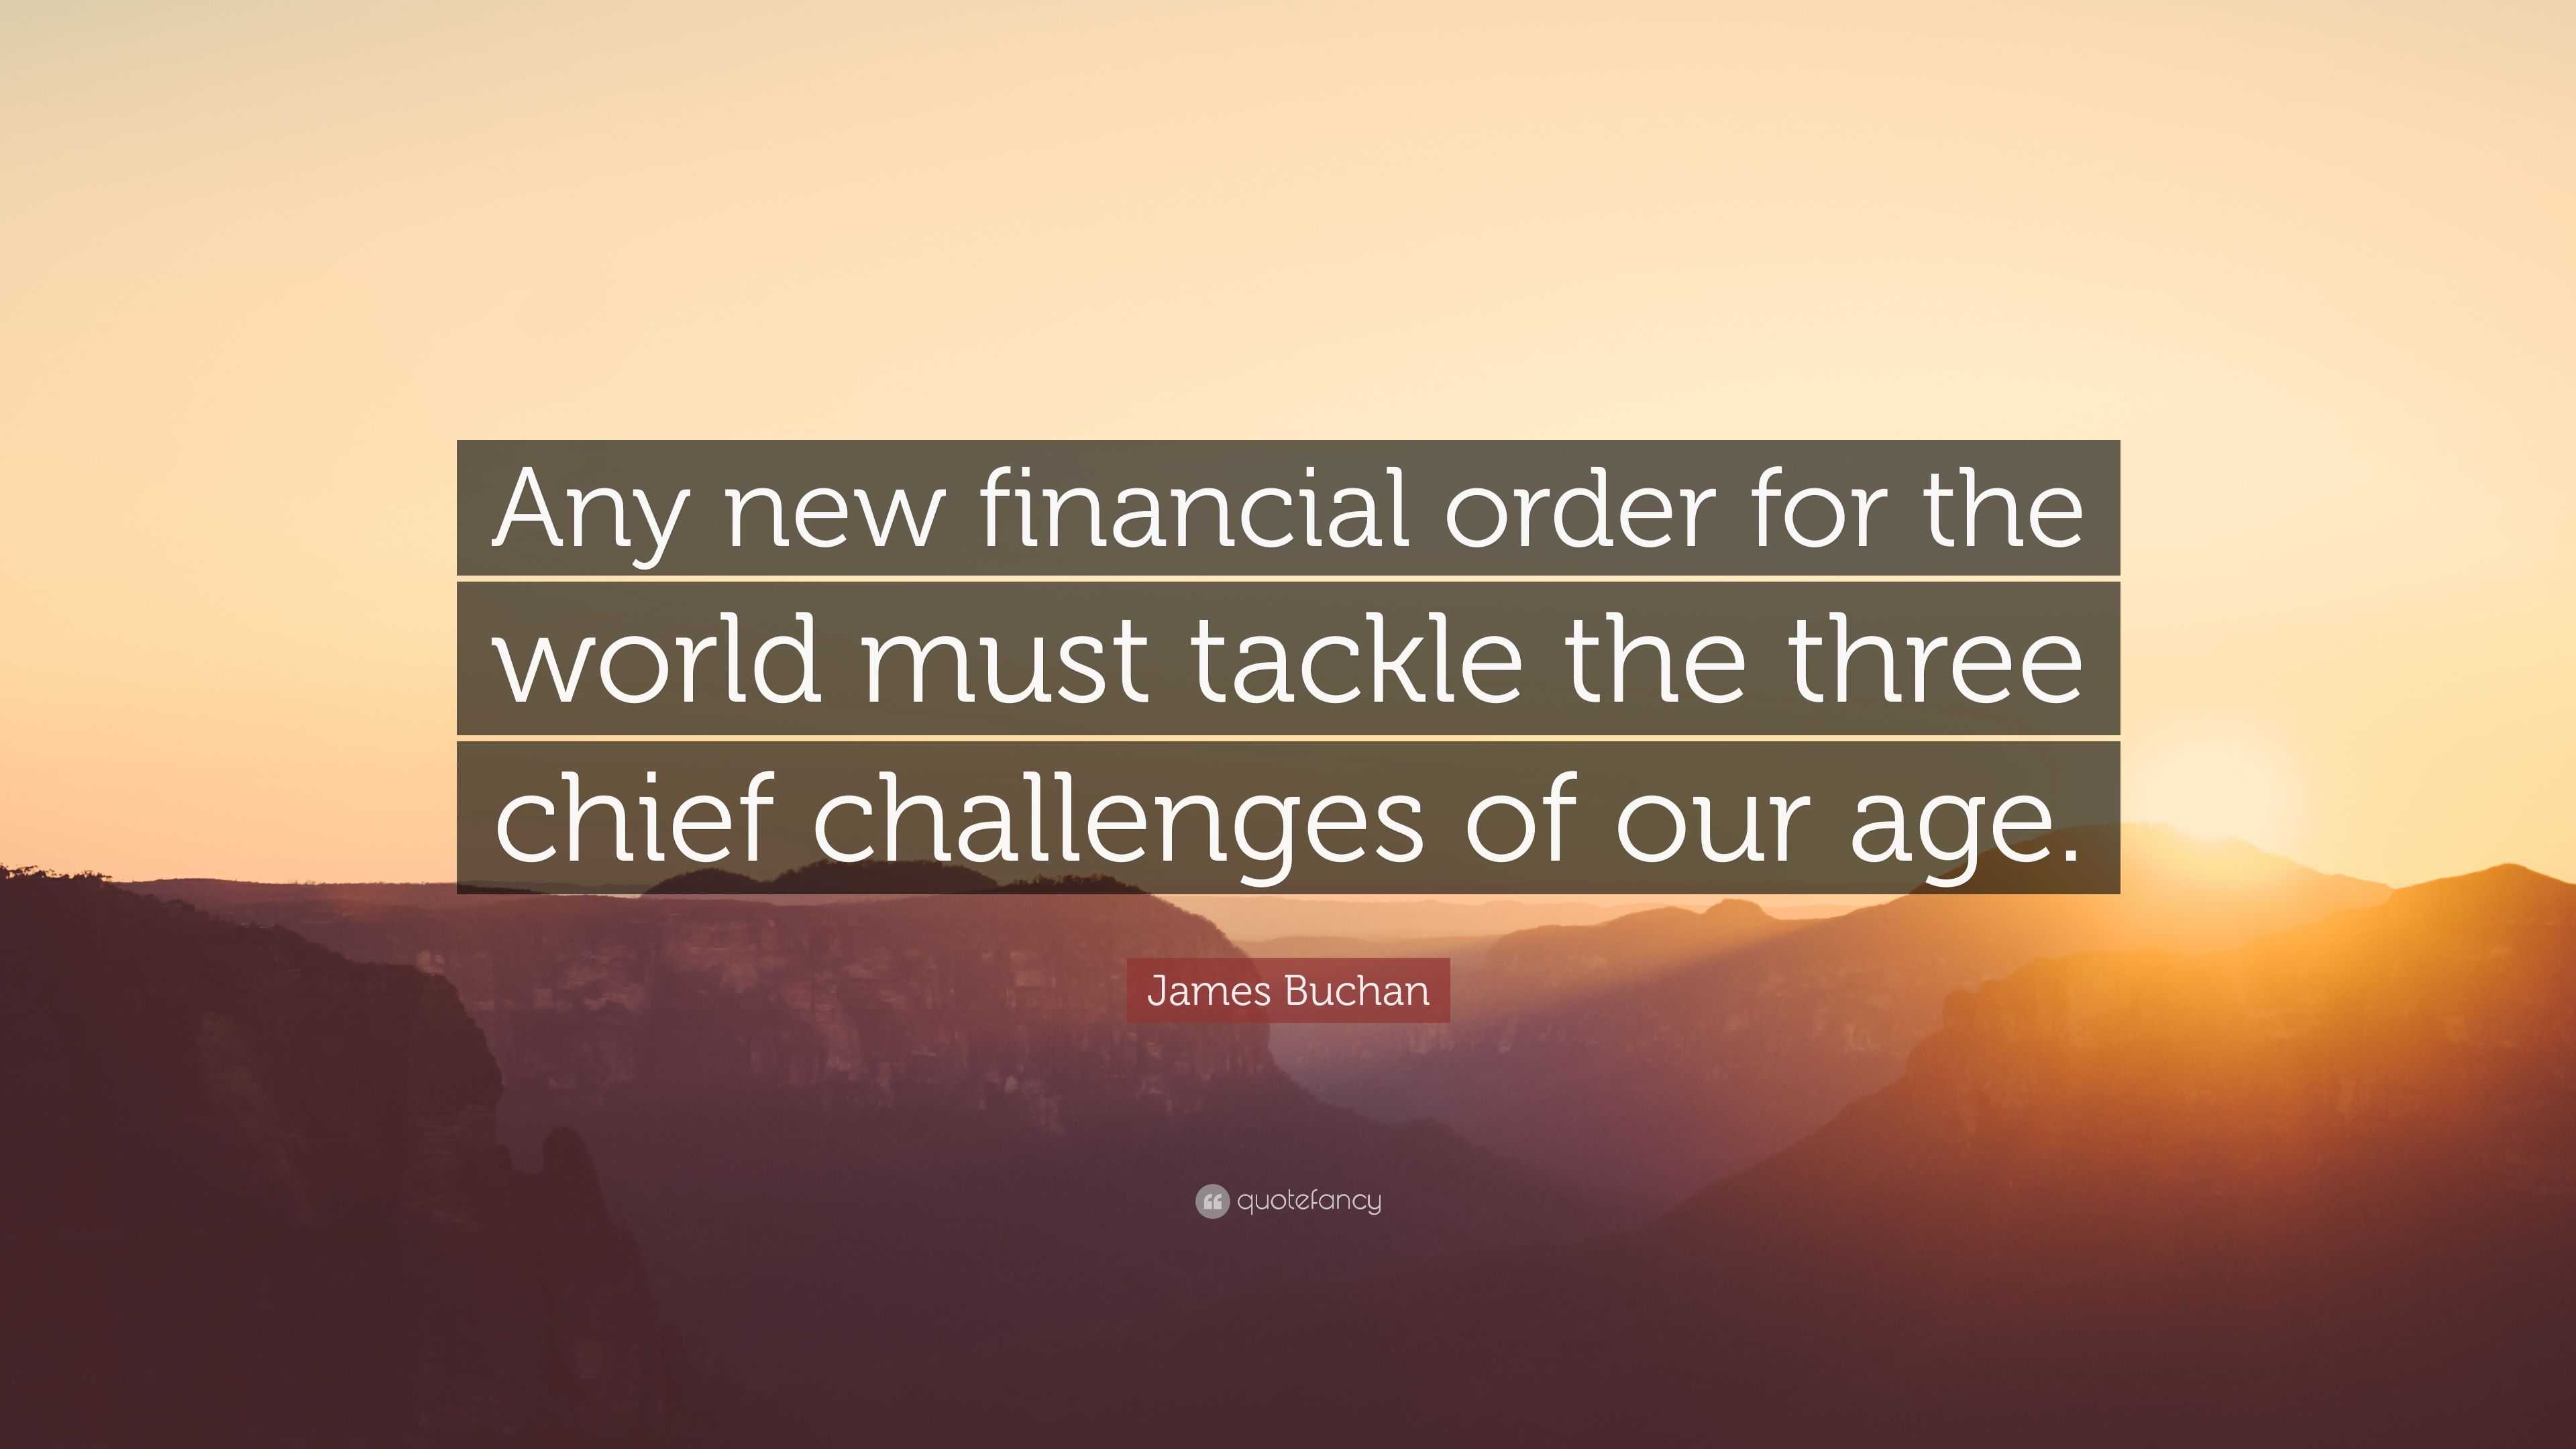 James Buchan Quote: “Any new financial order for the world must